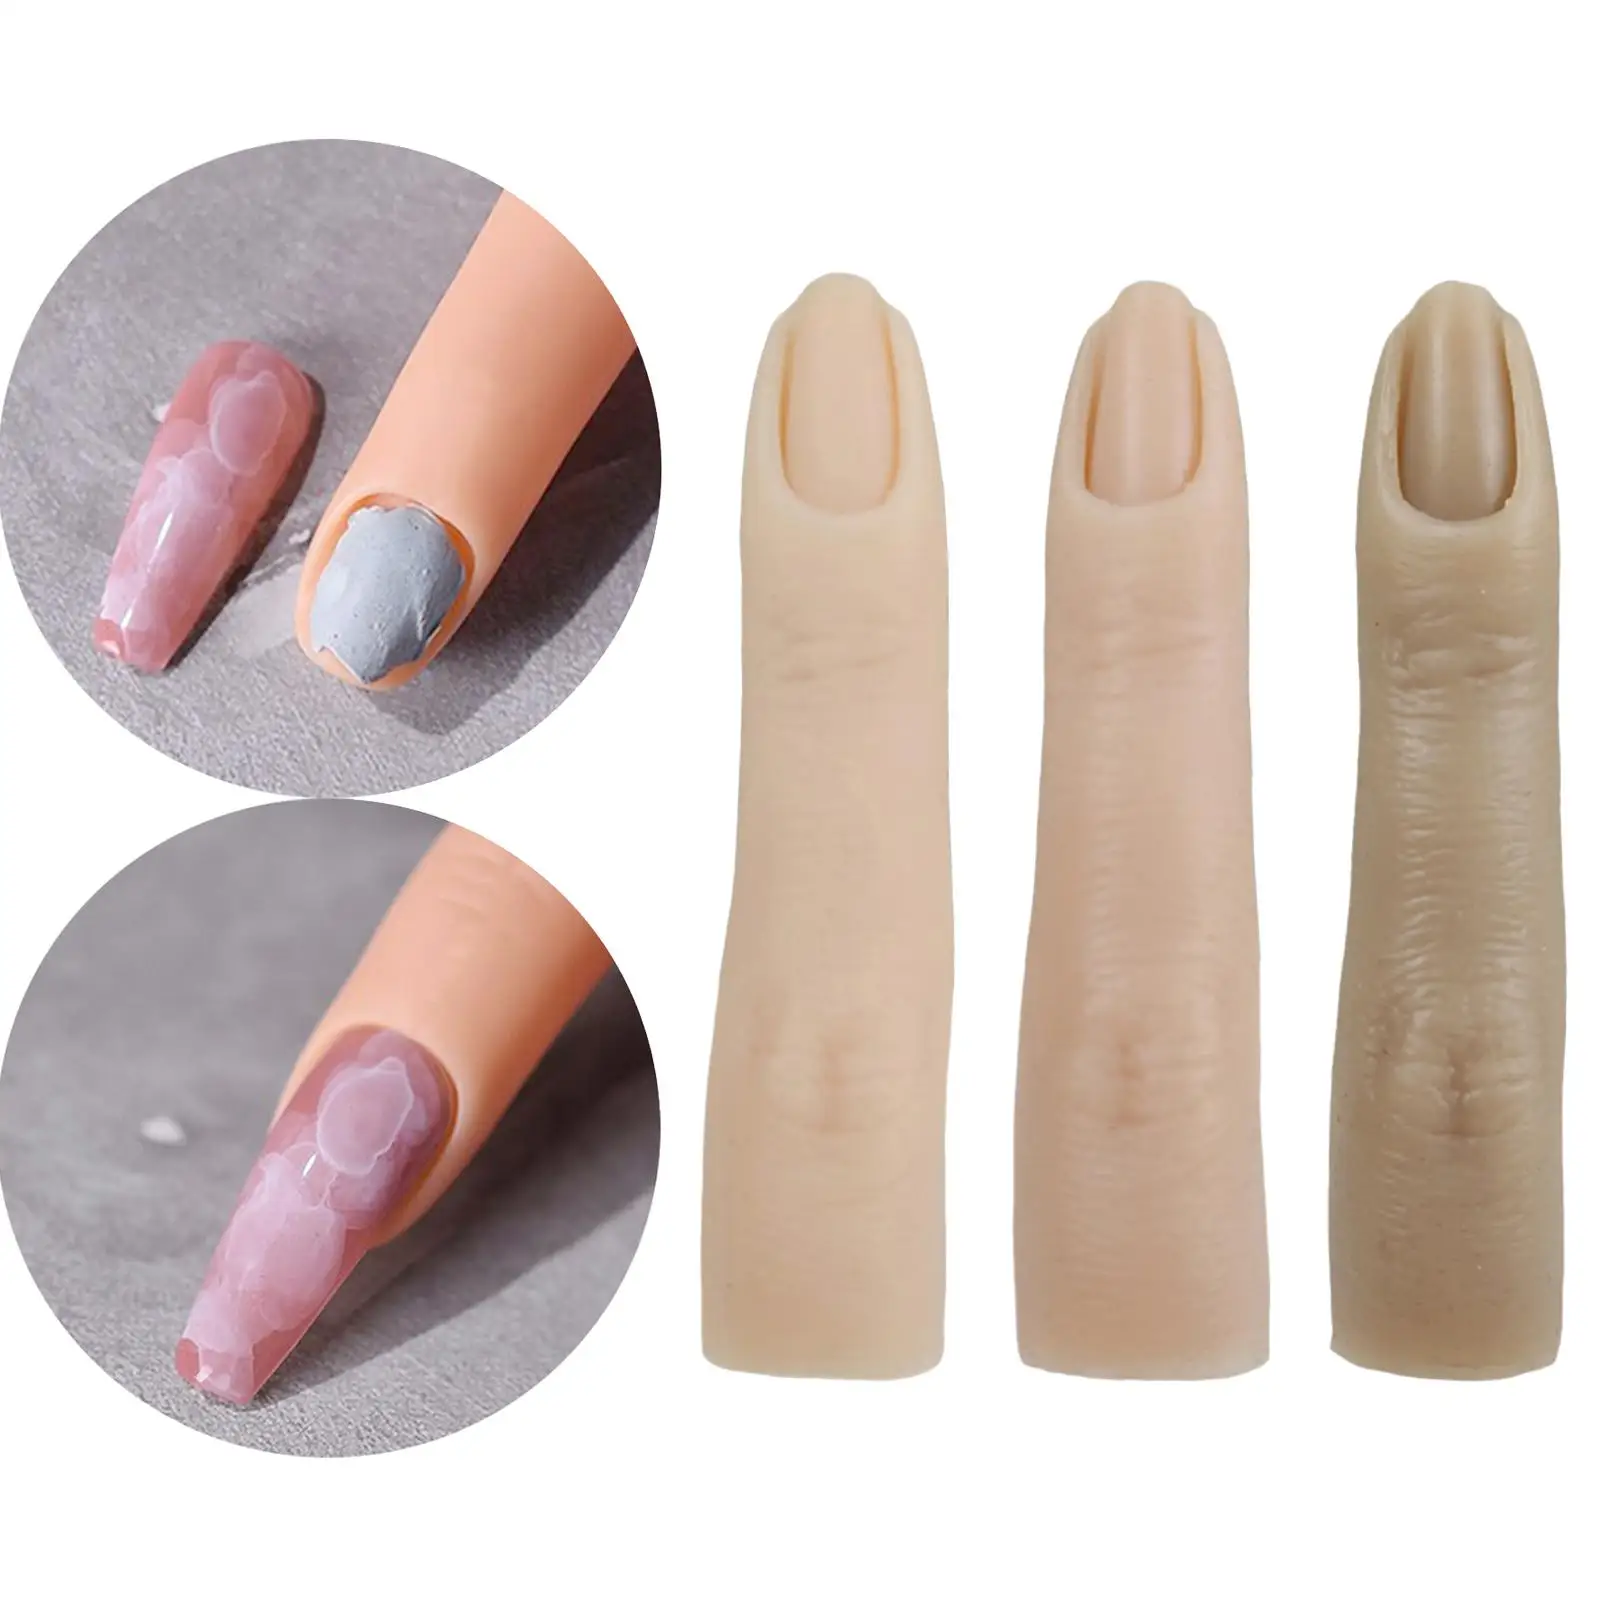 SilicPractice Nail Finger Fake Finger Training Tool Accessories Durable